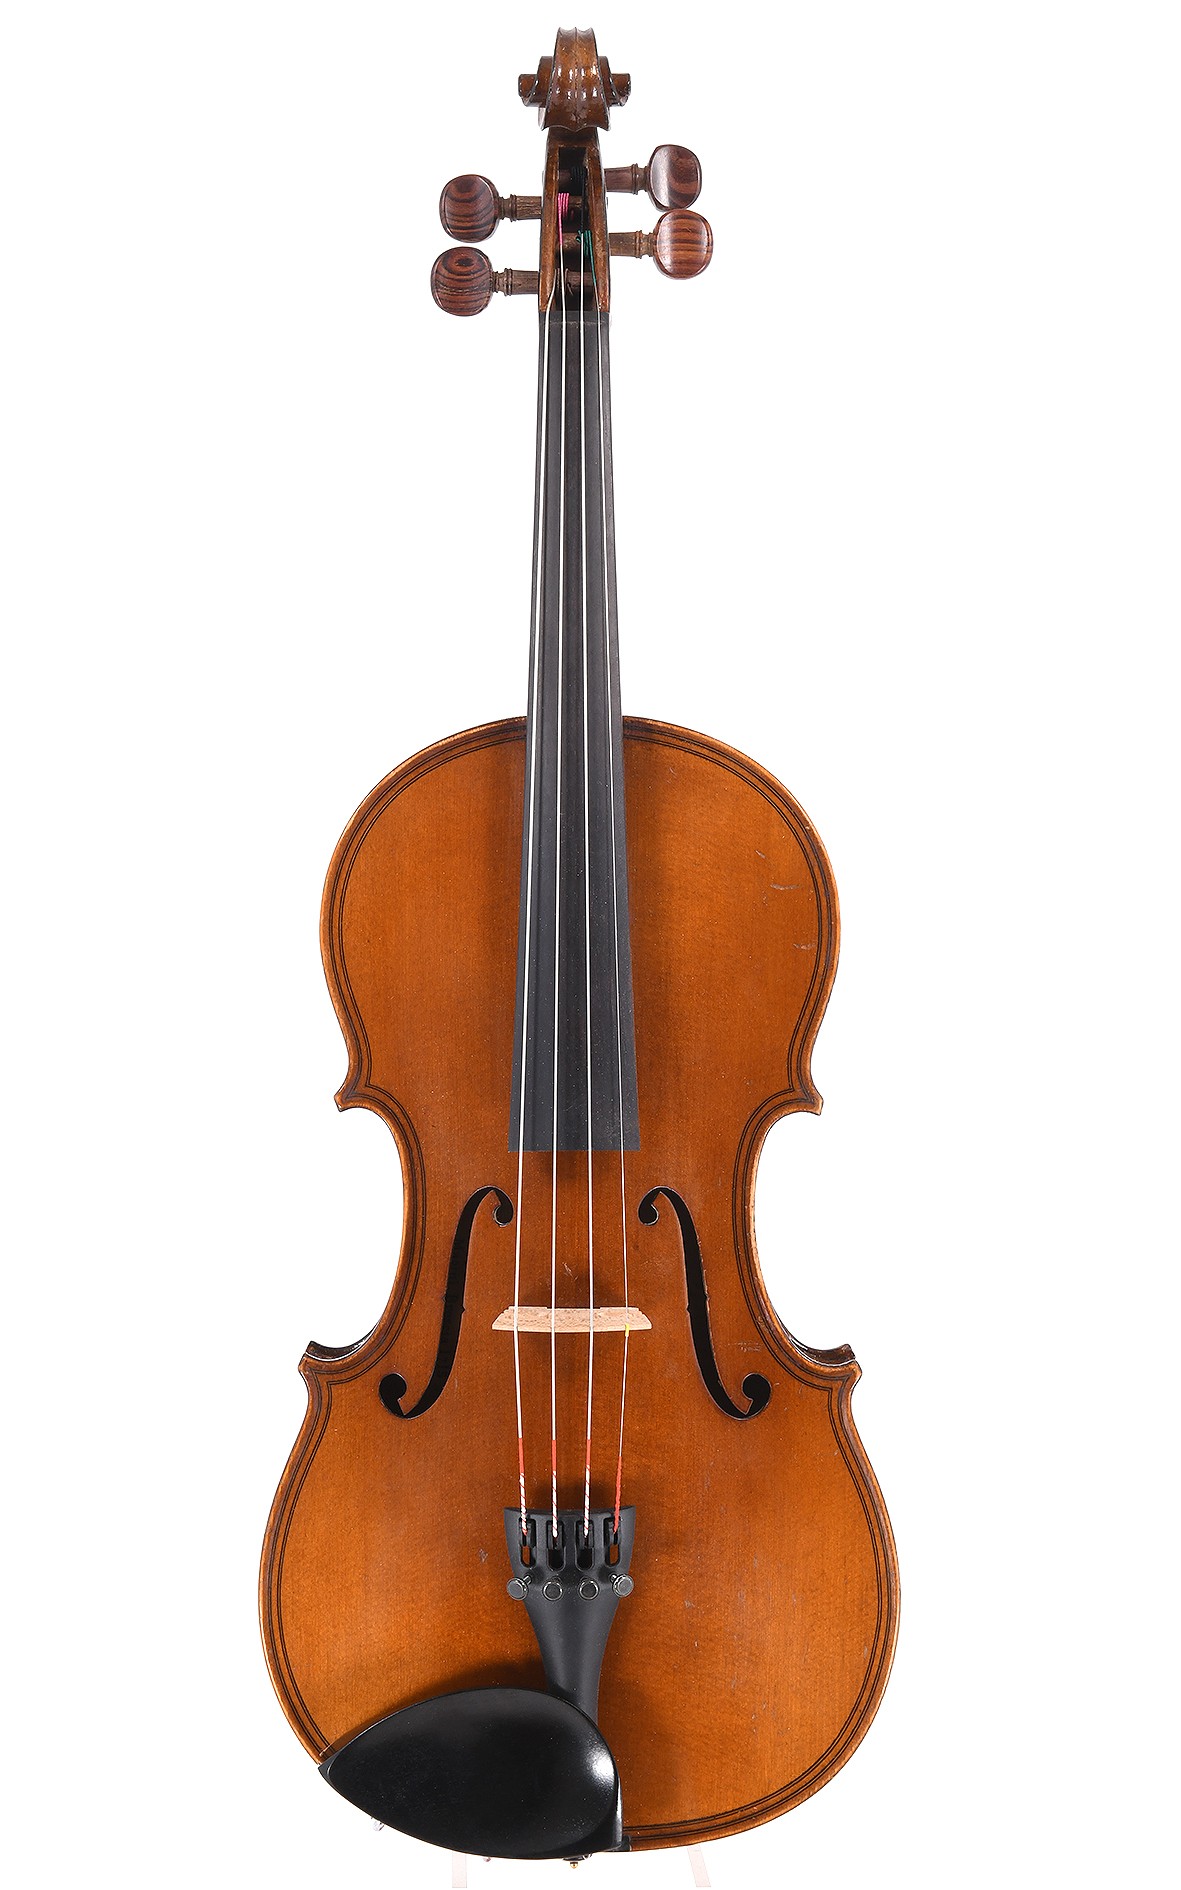 French violin after Maggini